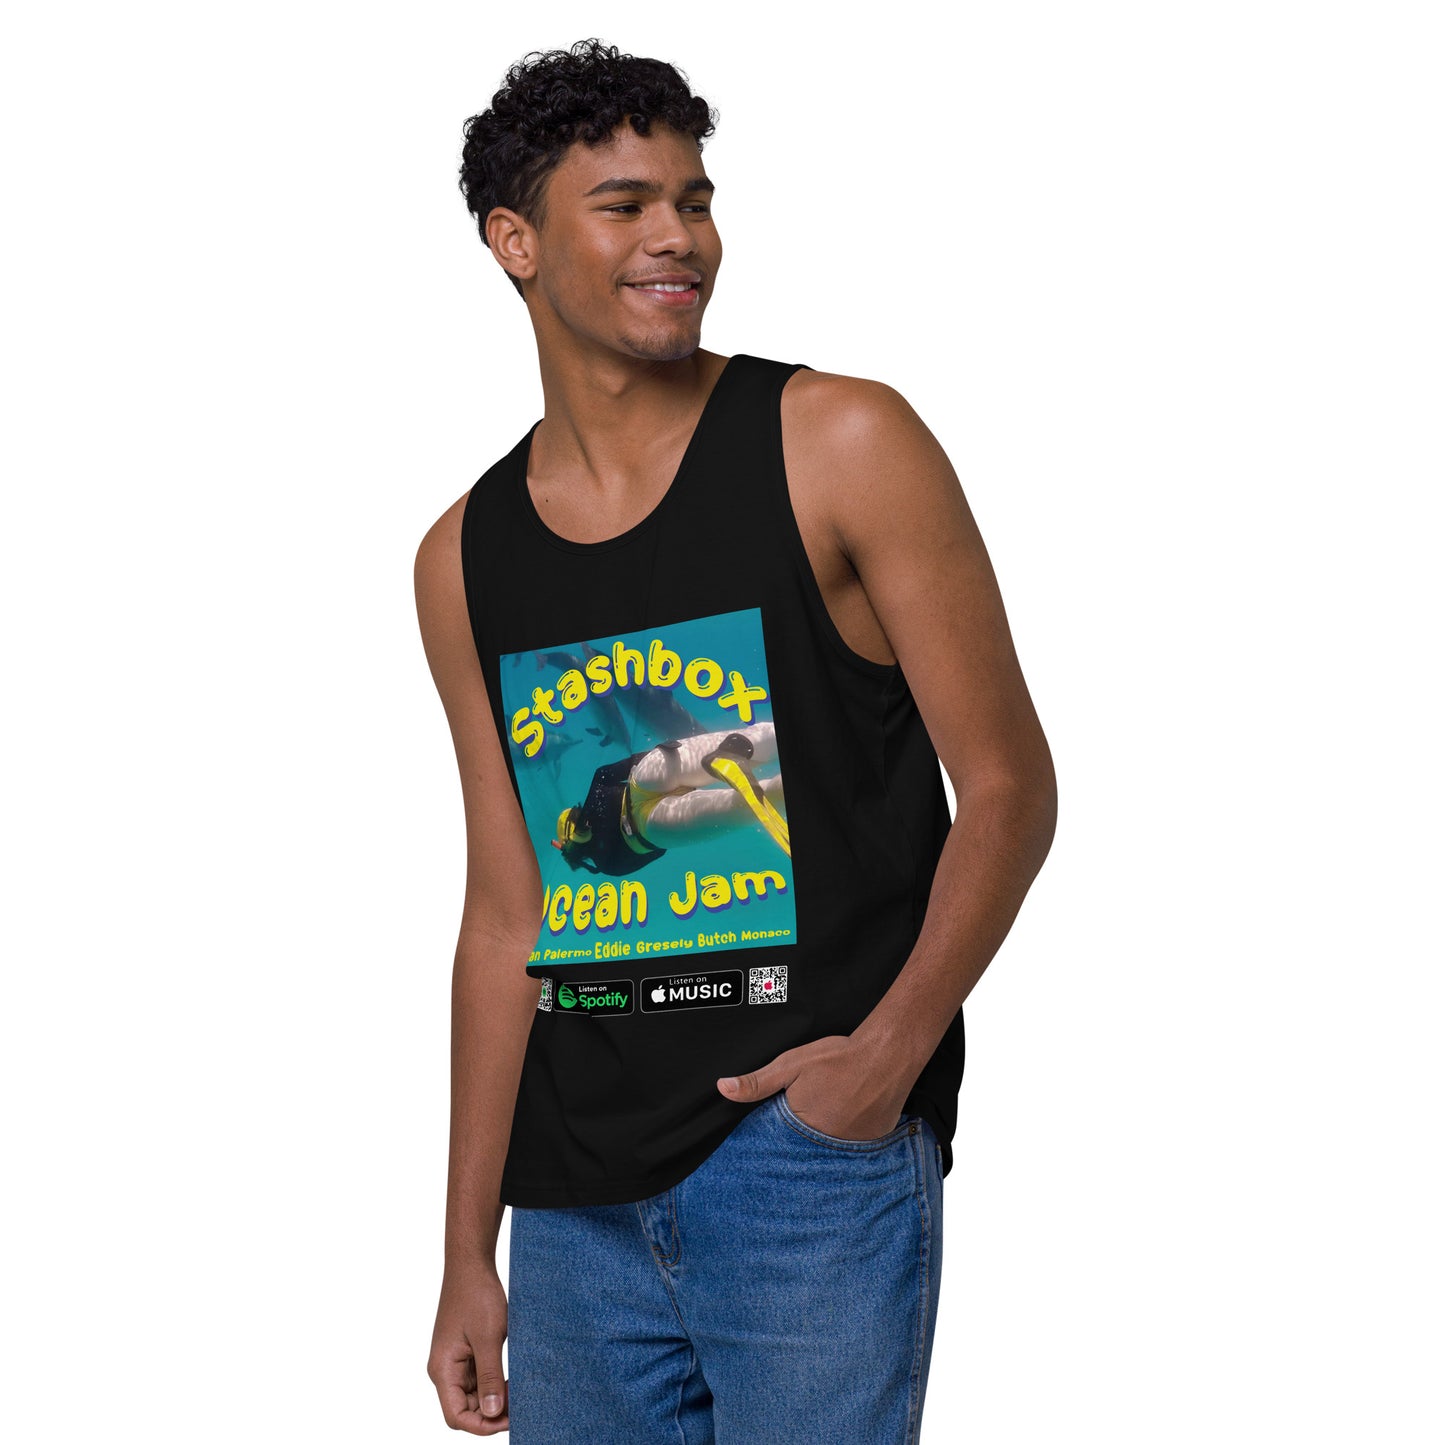 Dive into musical vibes with our Ocean Jam Men’s Premium Tank Top, Design #017. Your fashion, your gateway to musical expression, exclusively at Stashbox.ai.Dive into musical vibes with our Ocean Jam Men’s Premium Tank Top, Design #017. Your fashion, your gateway to musical expression, exclusively at Stashbox.ai.